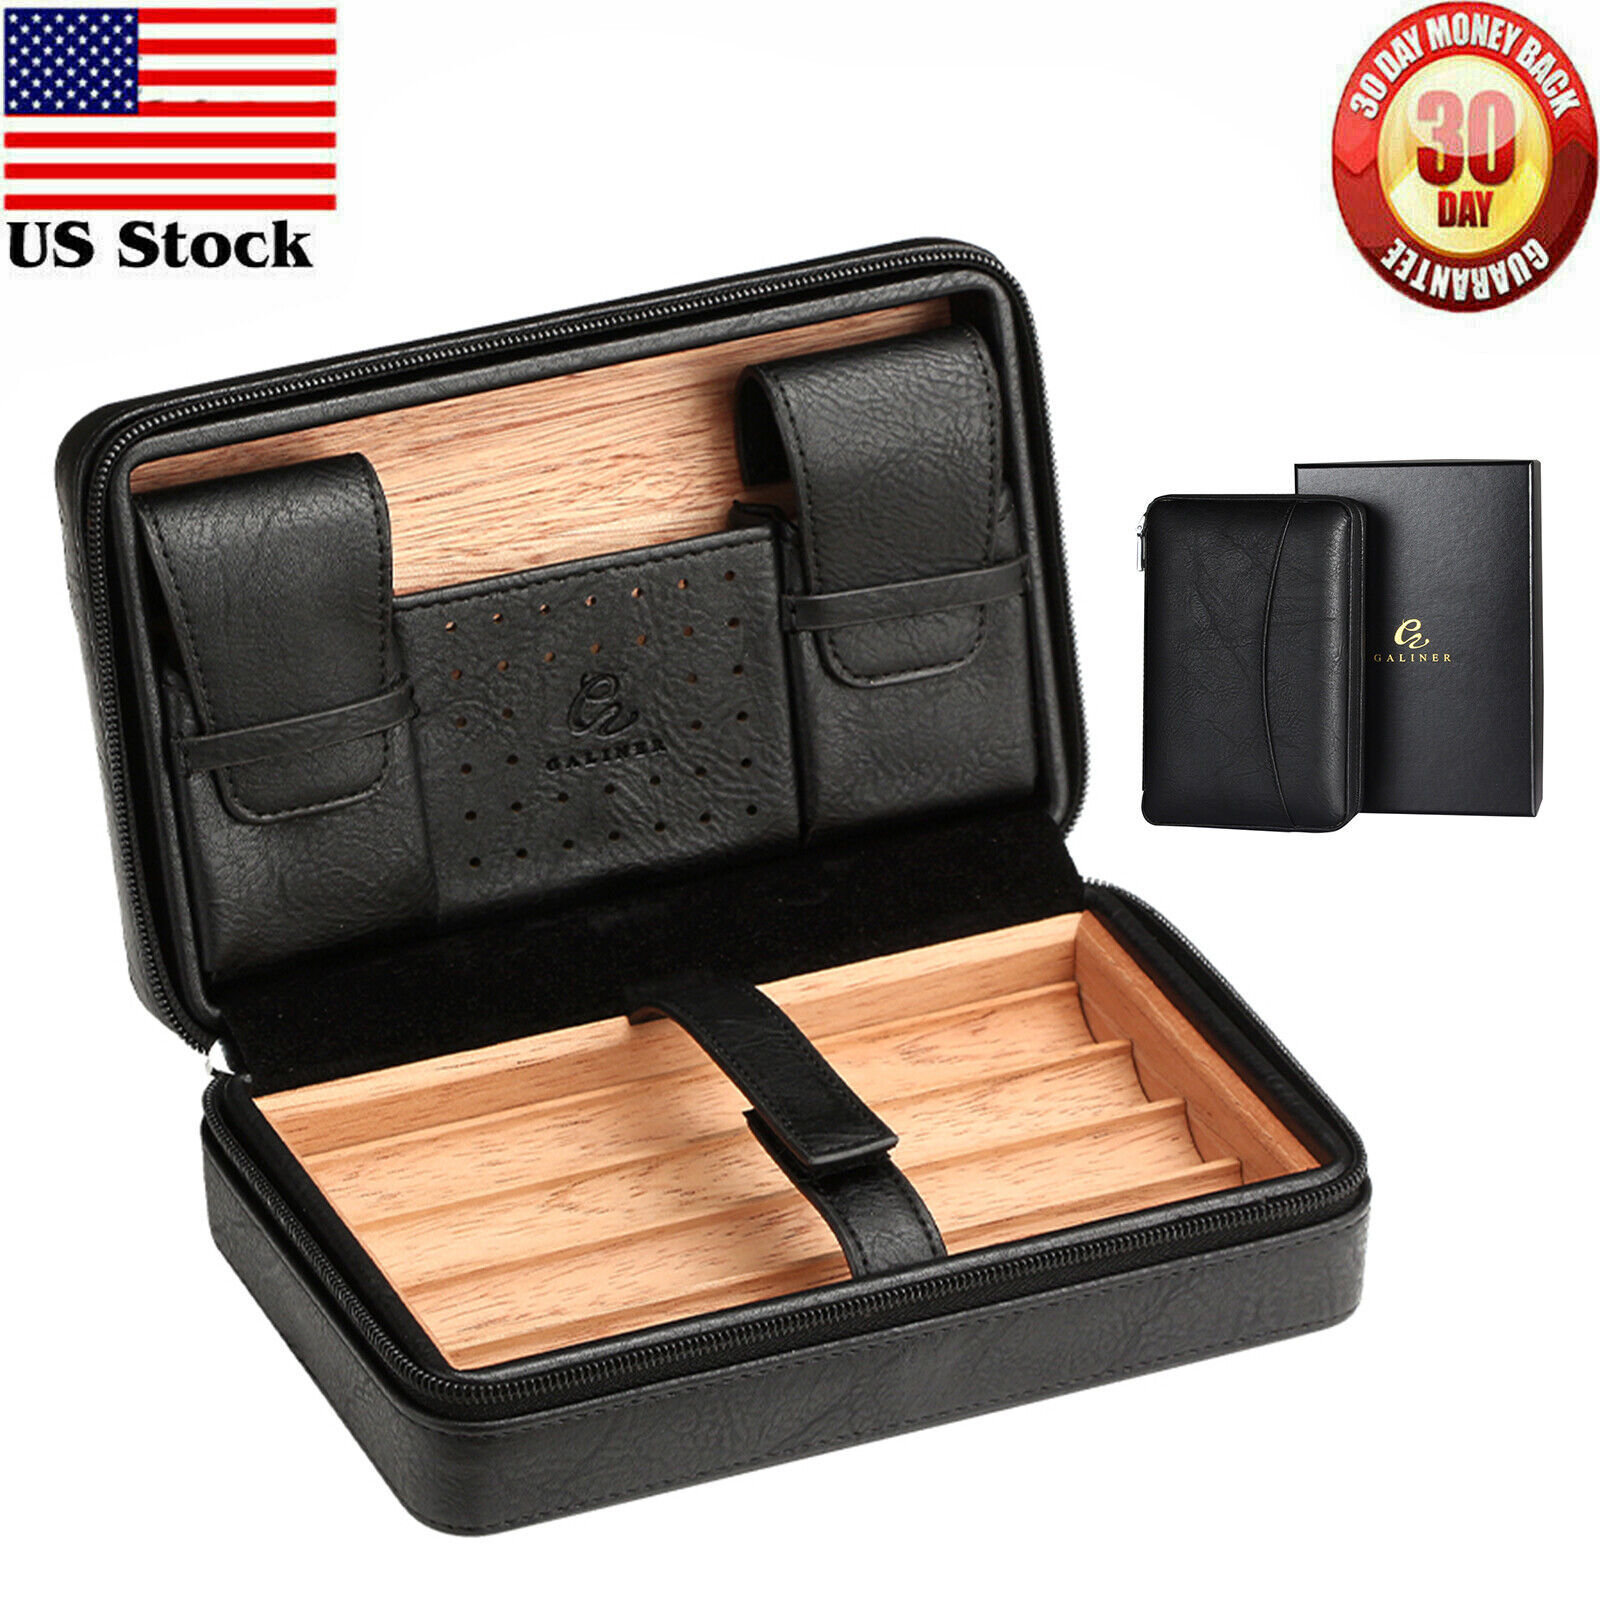 Galiner Travel Cigar Humidor Leather Case Cedar Wood Lined Holds 4ct W/ Gift Box